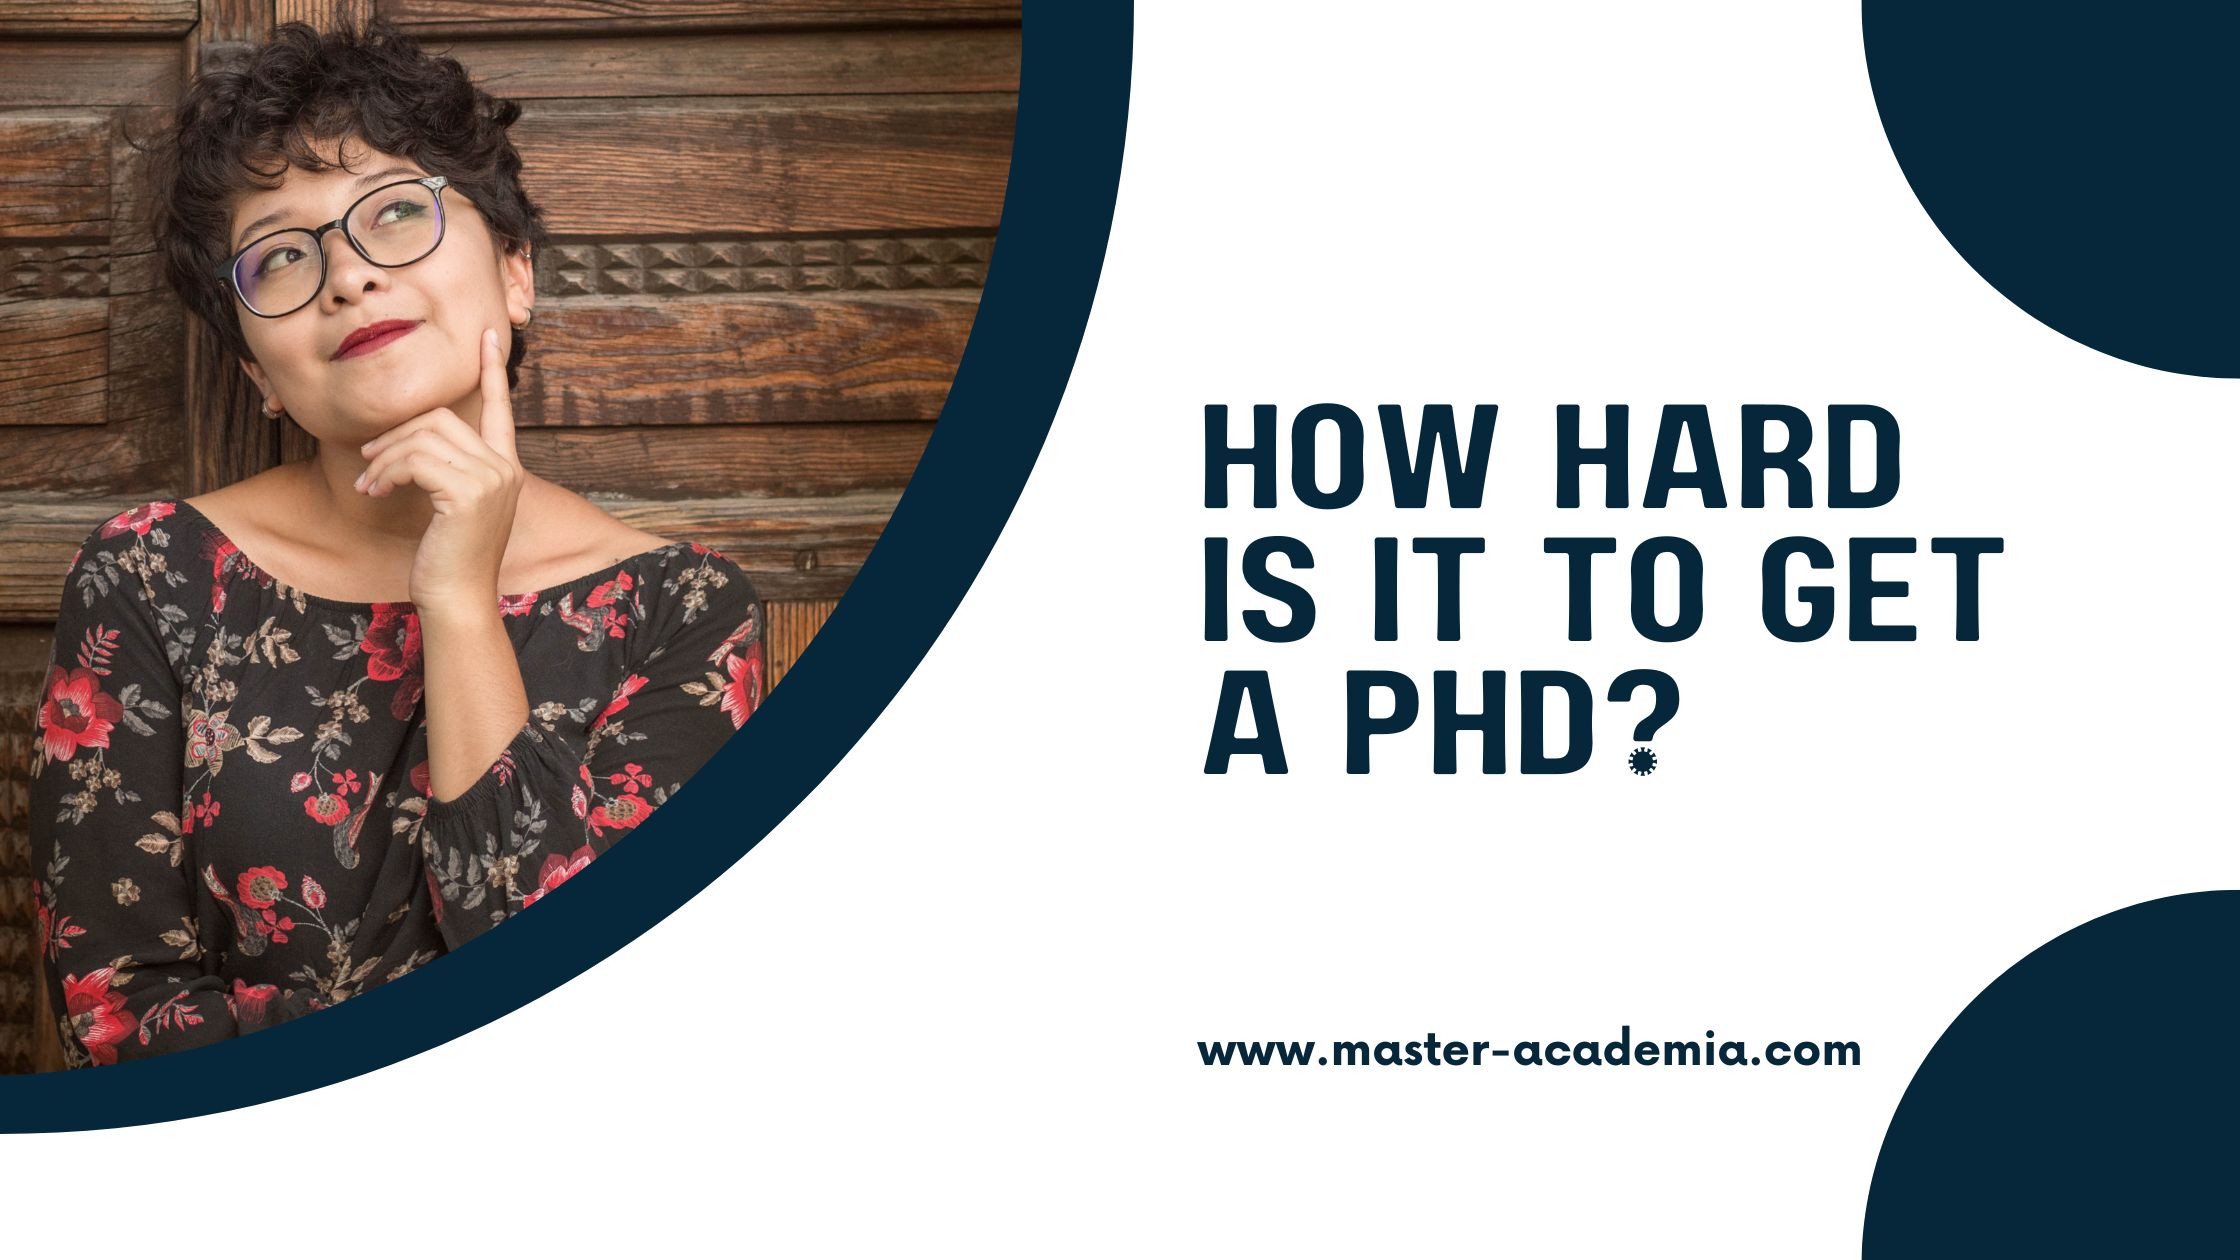 phd students can work full time